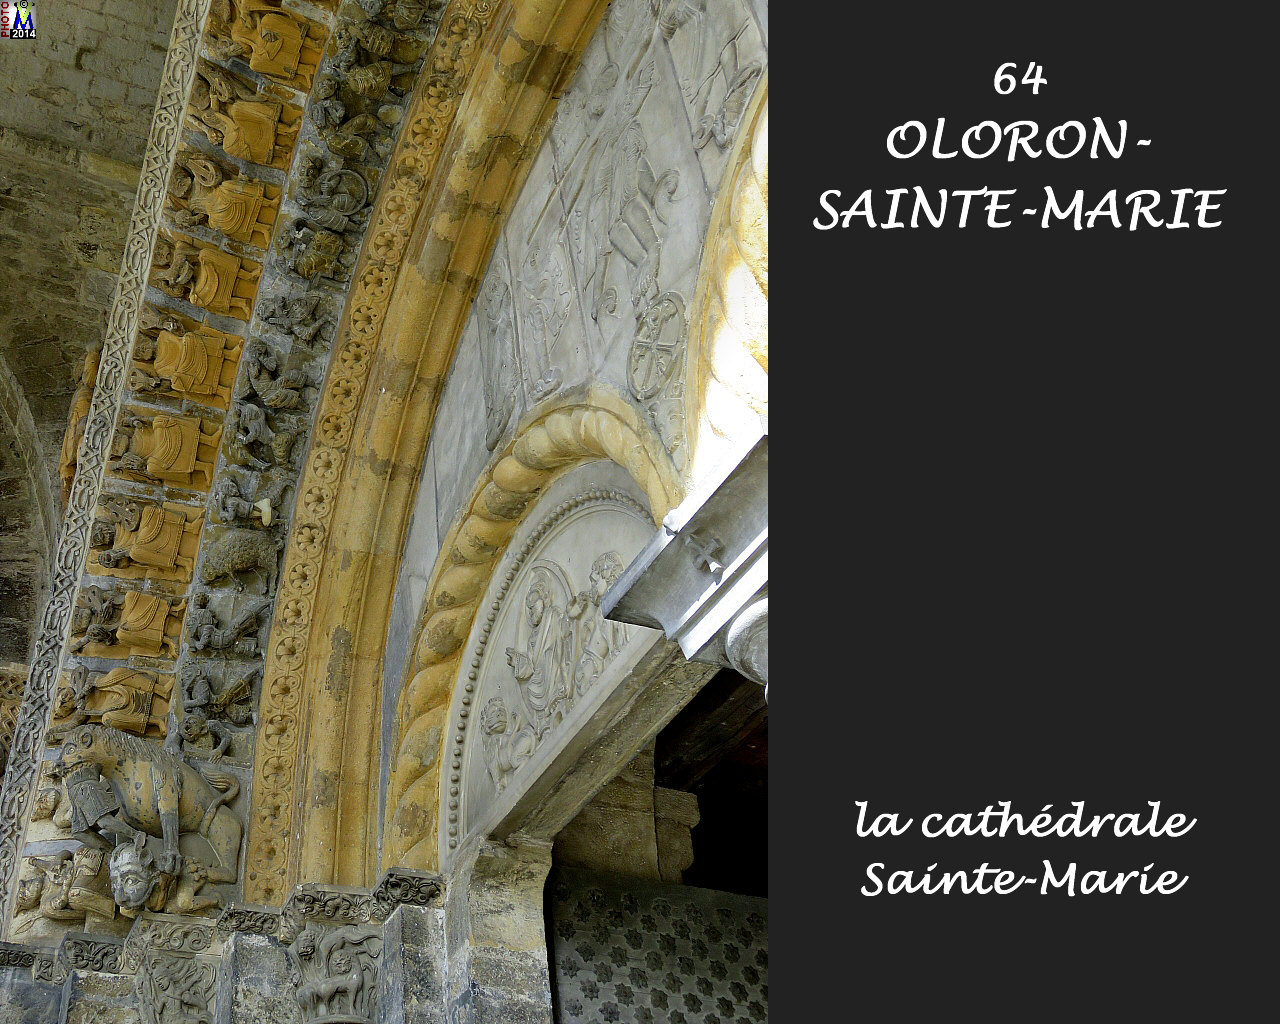 64OLORON-STE-MARIE_cathedrale_158.jpg